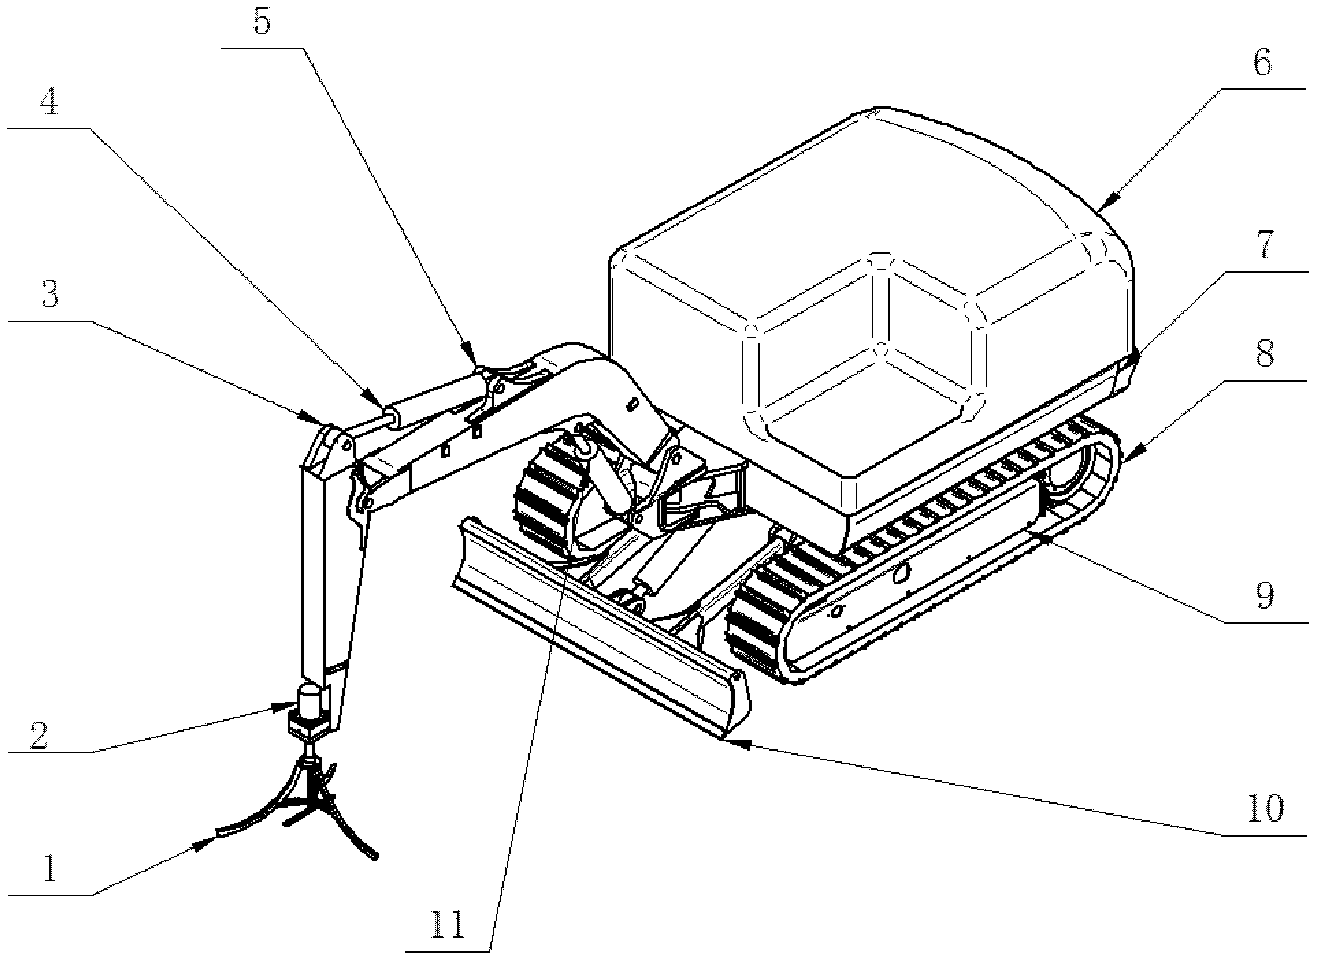 Self-stirring type dredging device for river channels